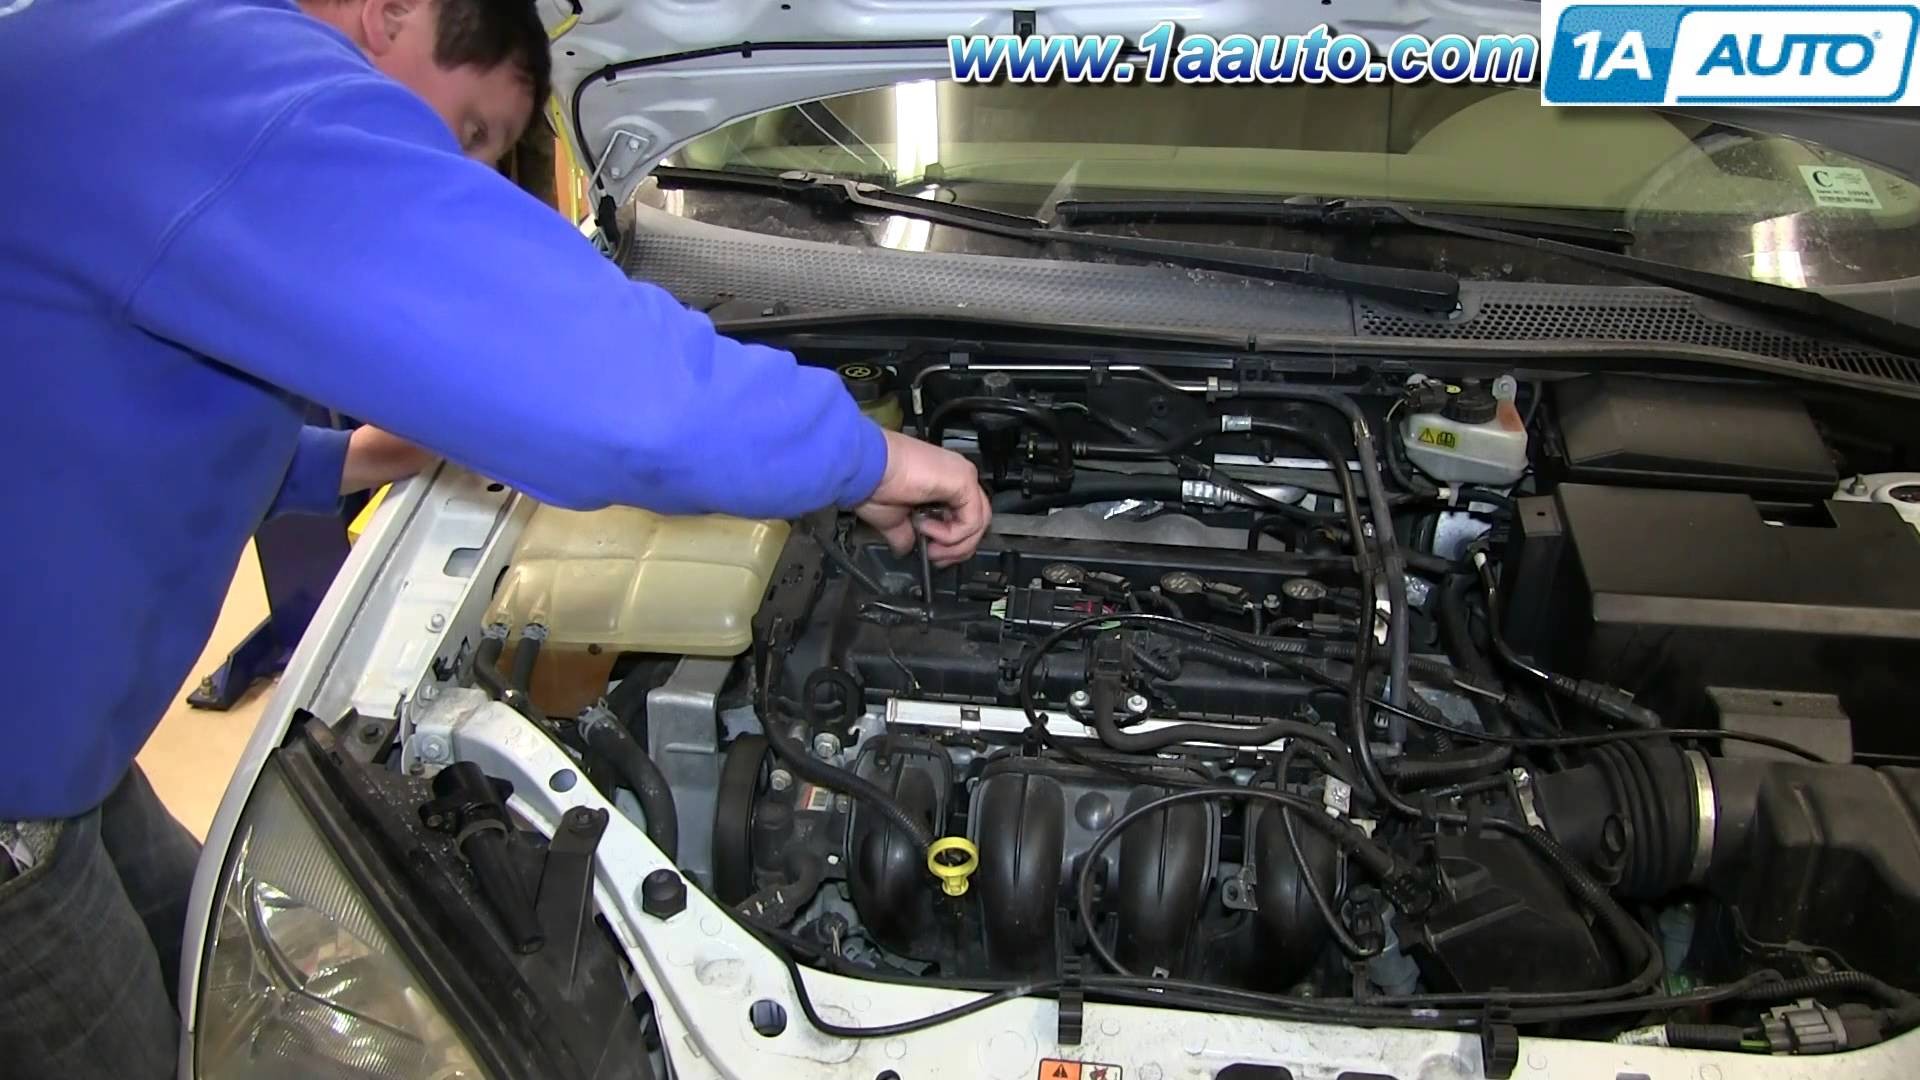 Ford Focus Zetec Engine Diagram How to Install Replace Spark Plugs 2 0l ford Focus Of Ford Focus Zetec Engine Diagram